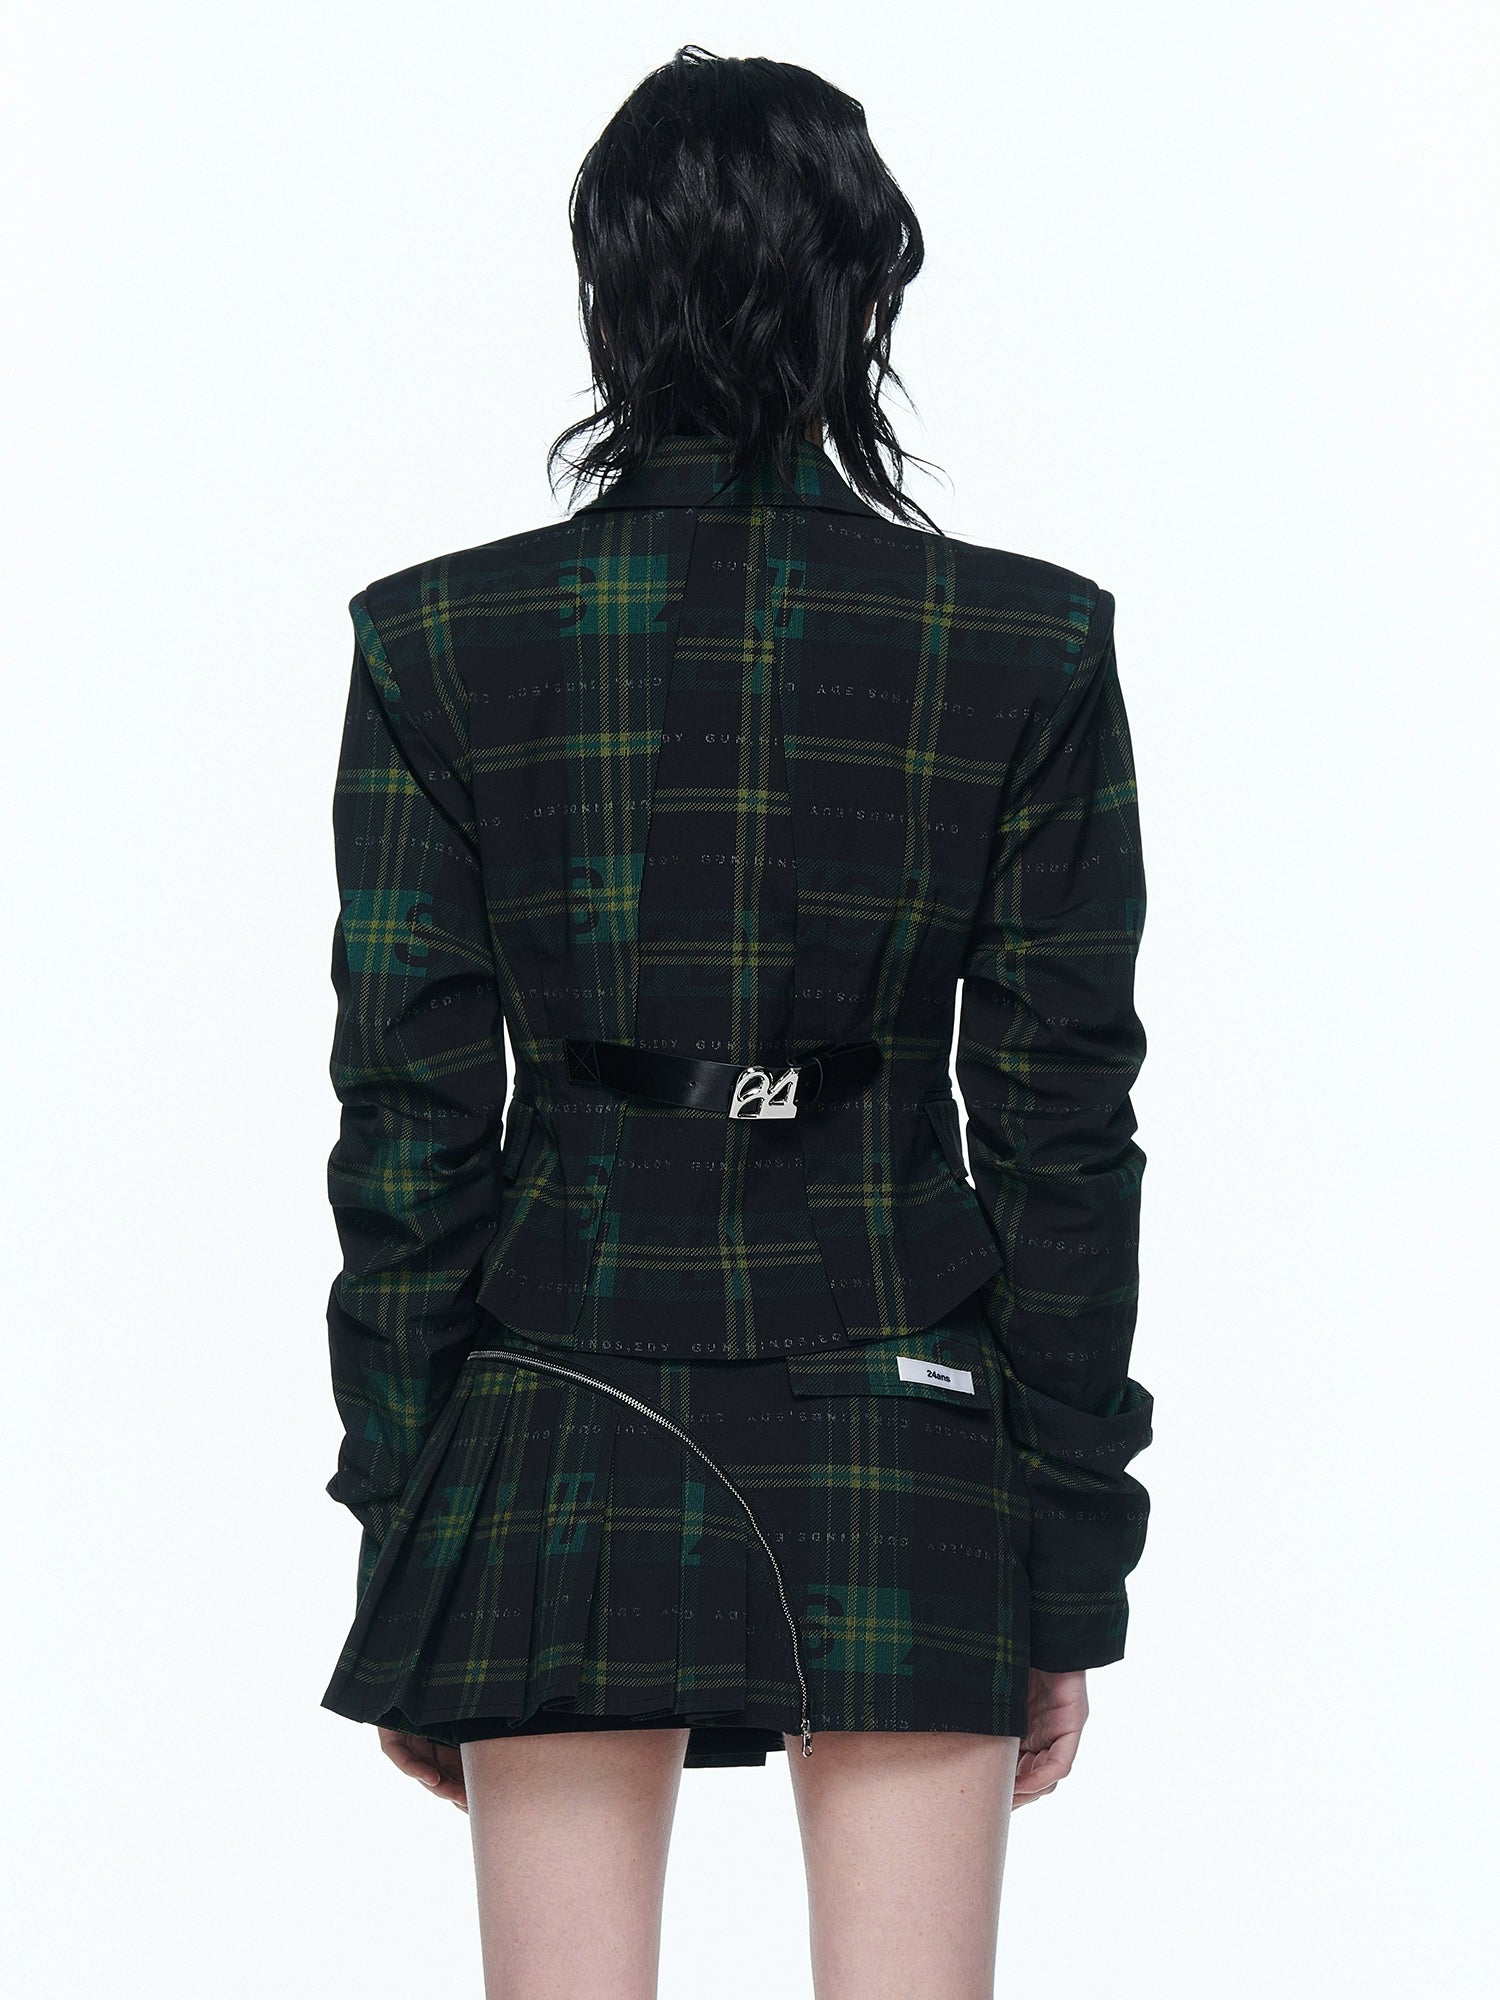 Youth Green Play Suit with Plaid Pattern